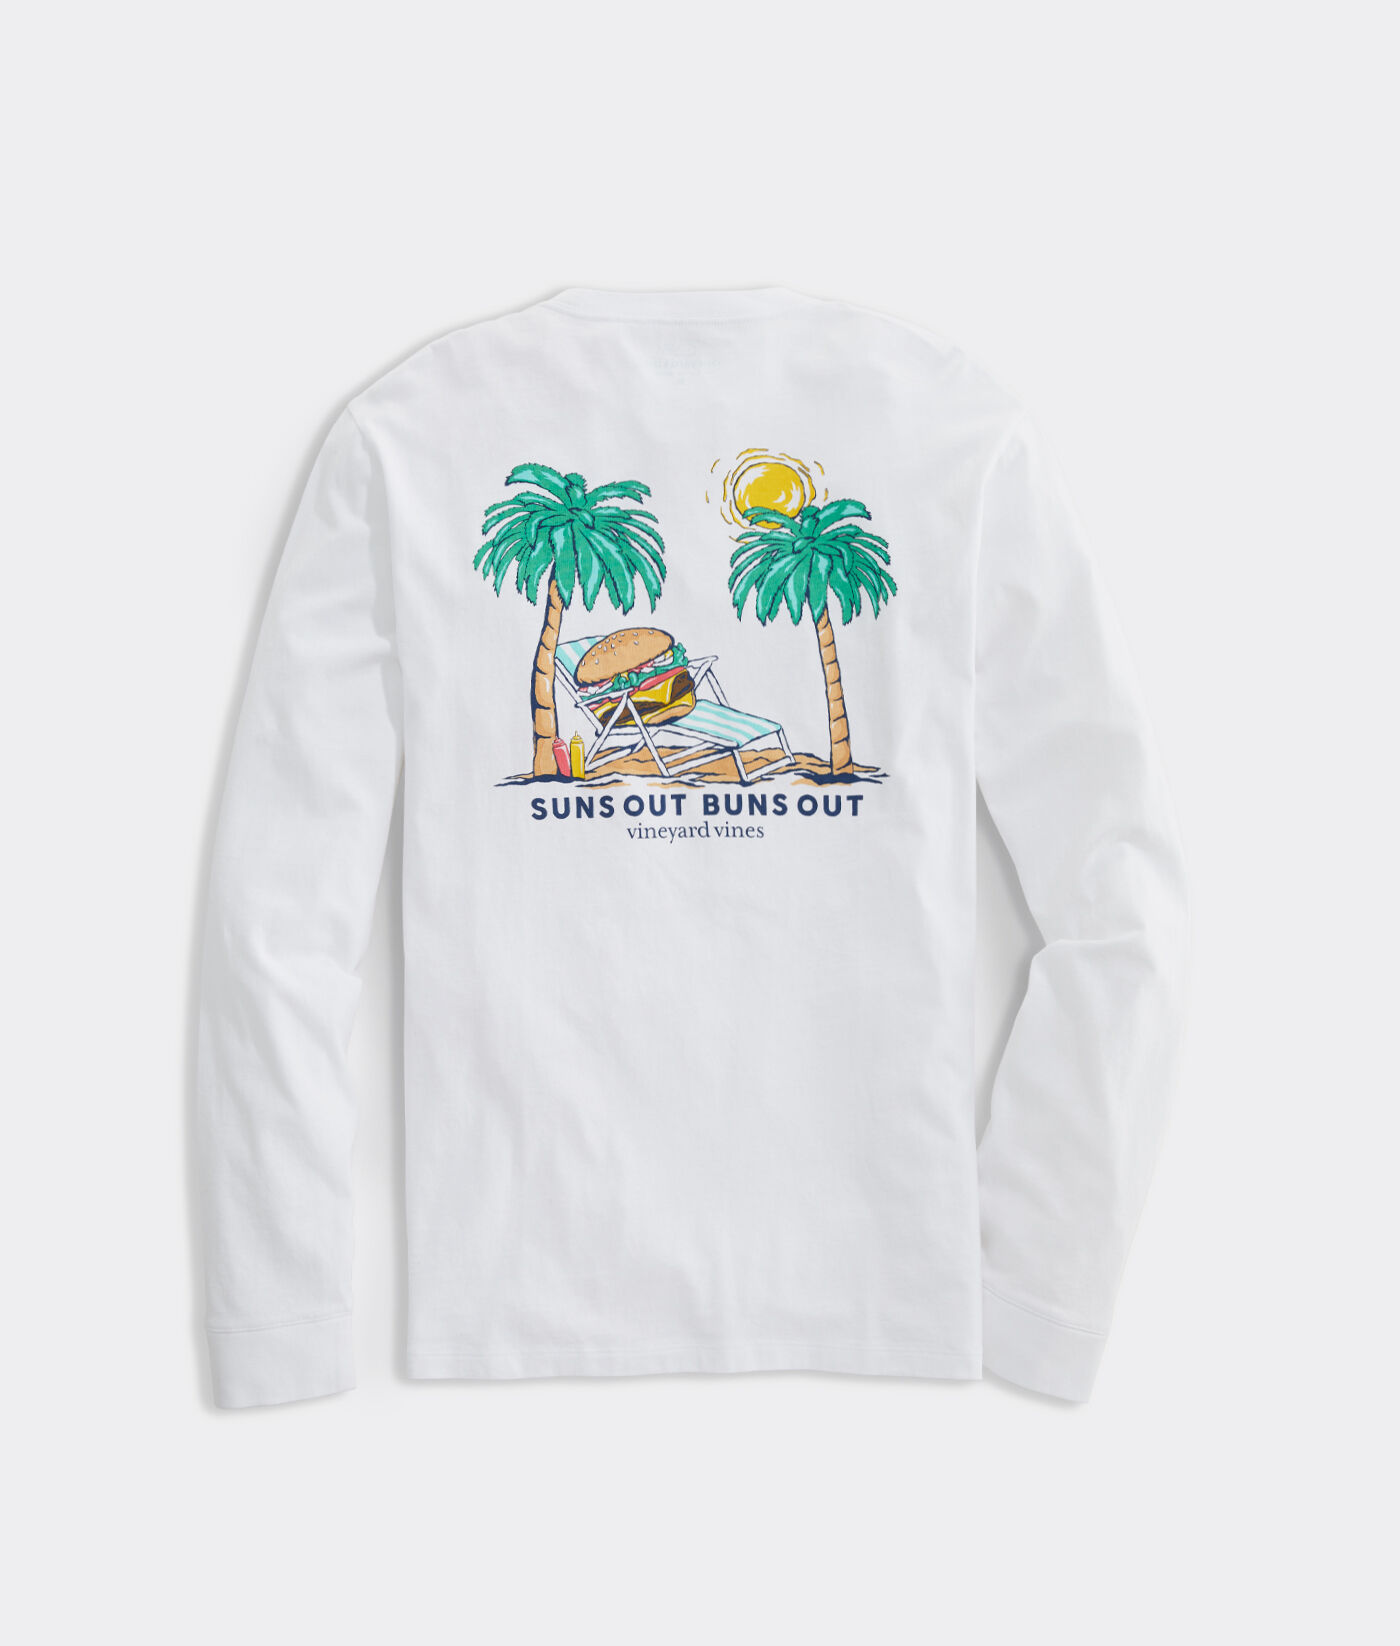 Shop Suns Out Buns Out Long-Sleeve Pocket Tee at vineyard vines